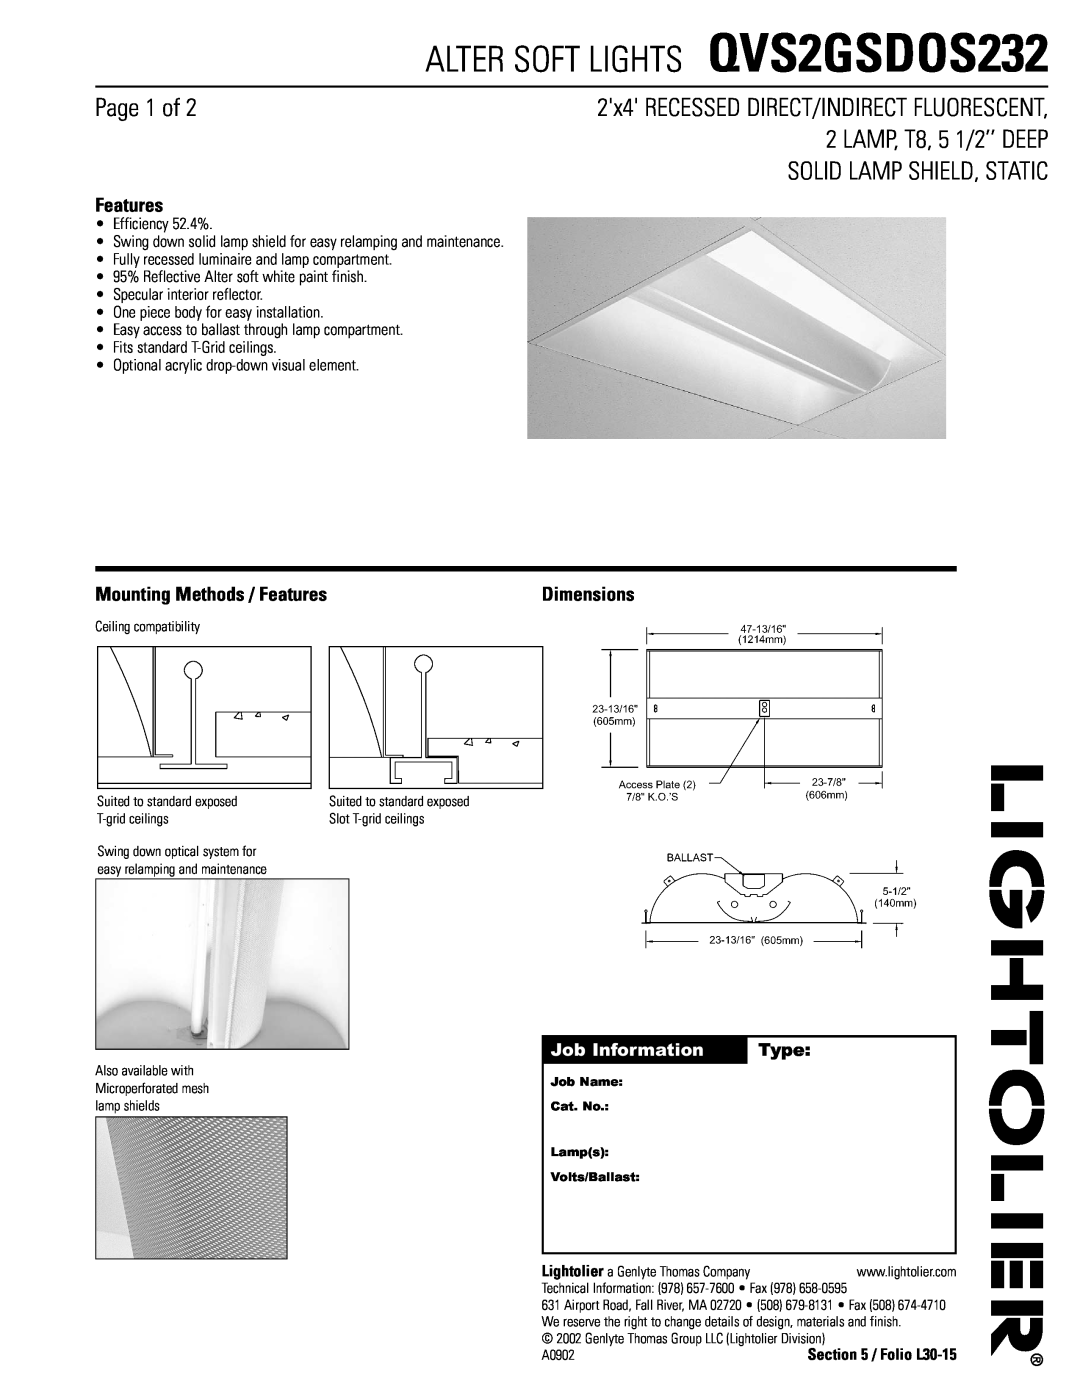 Lightolier dimensions ALTER SOFT LIGHTS QVS2GSDOS232, Page 1 of, LAMP, T8, 5 1/2’’ DEEP, Solid Lamp Shield, Static 